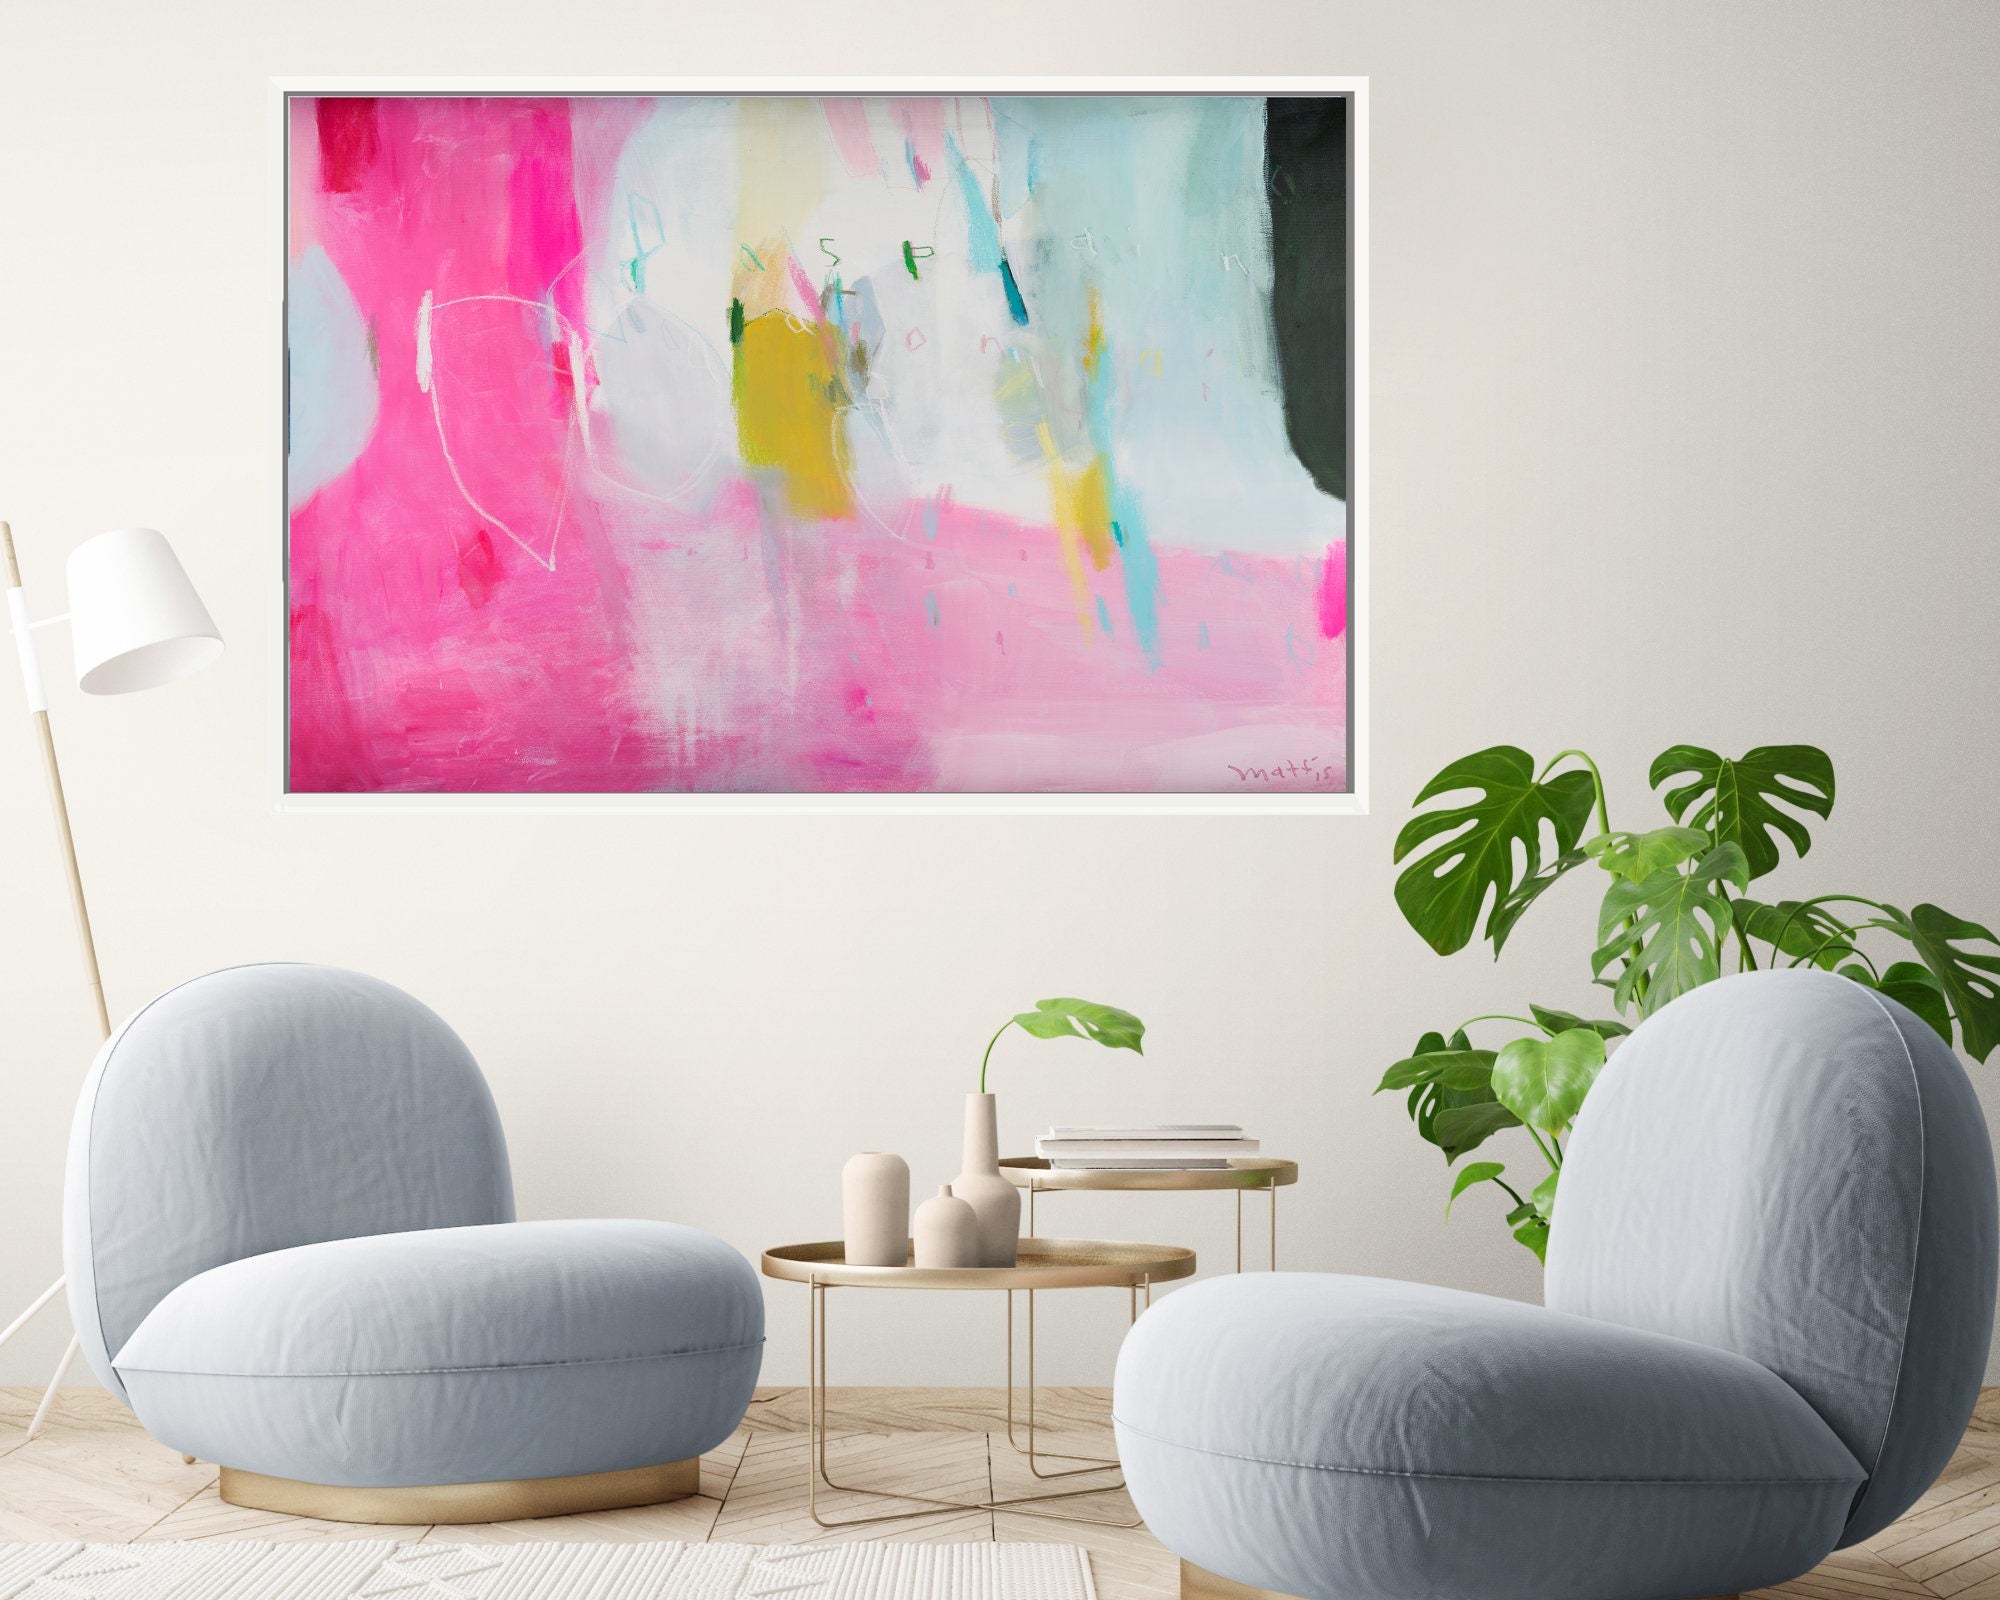 Blush pink abstract canvas Wall paper Art, colourful home decor extra large abstract art print